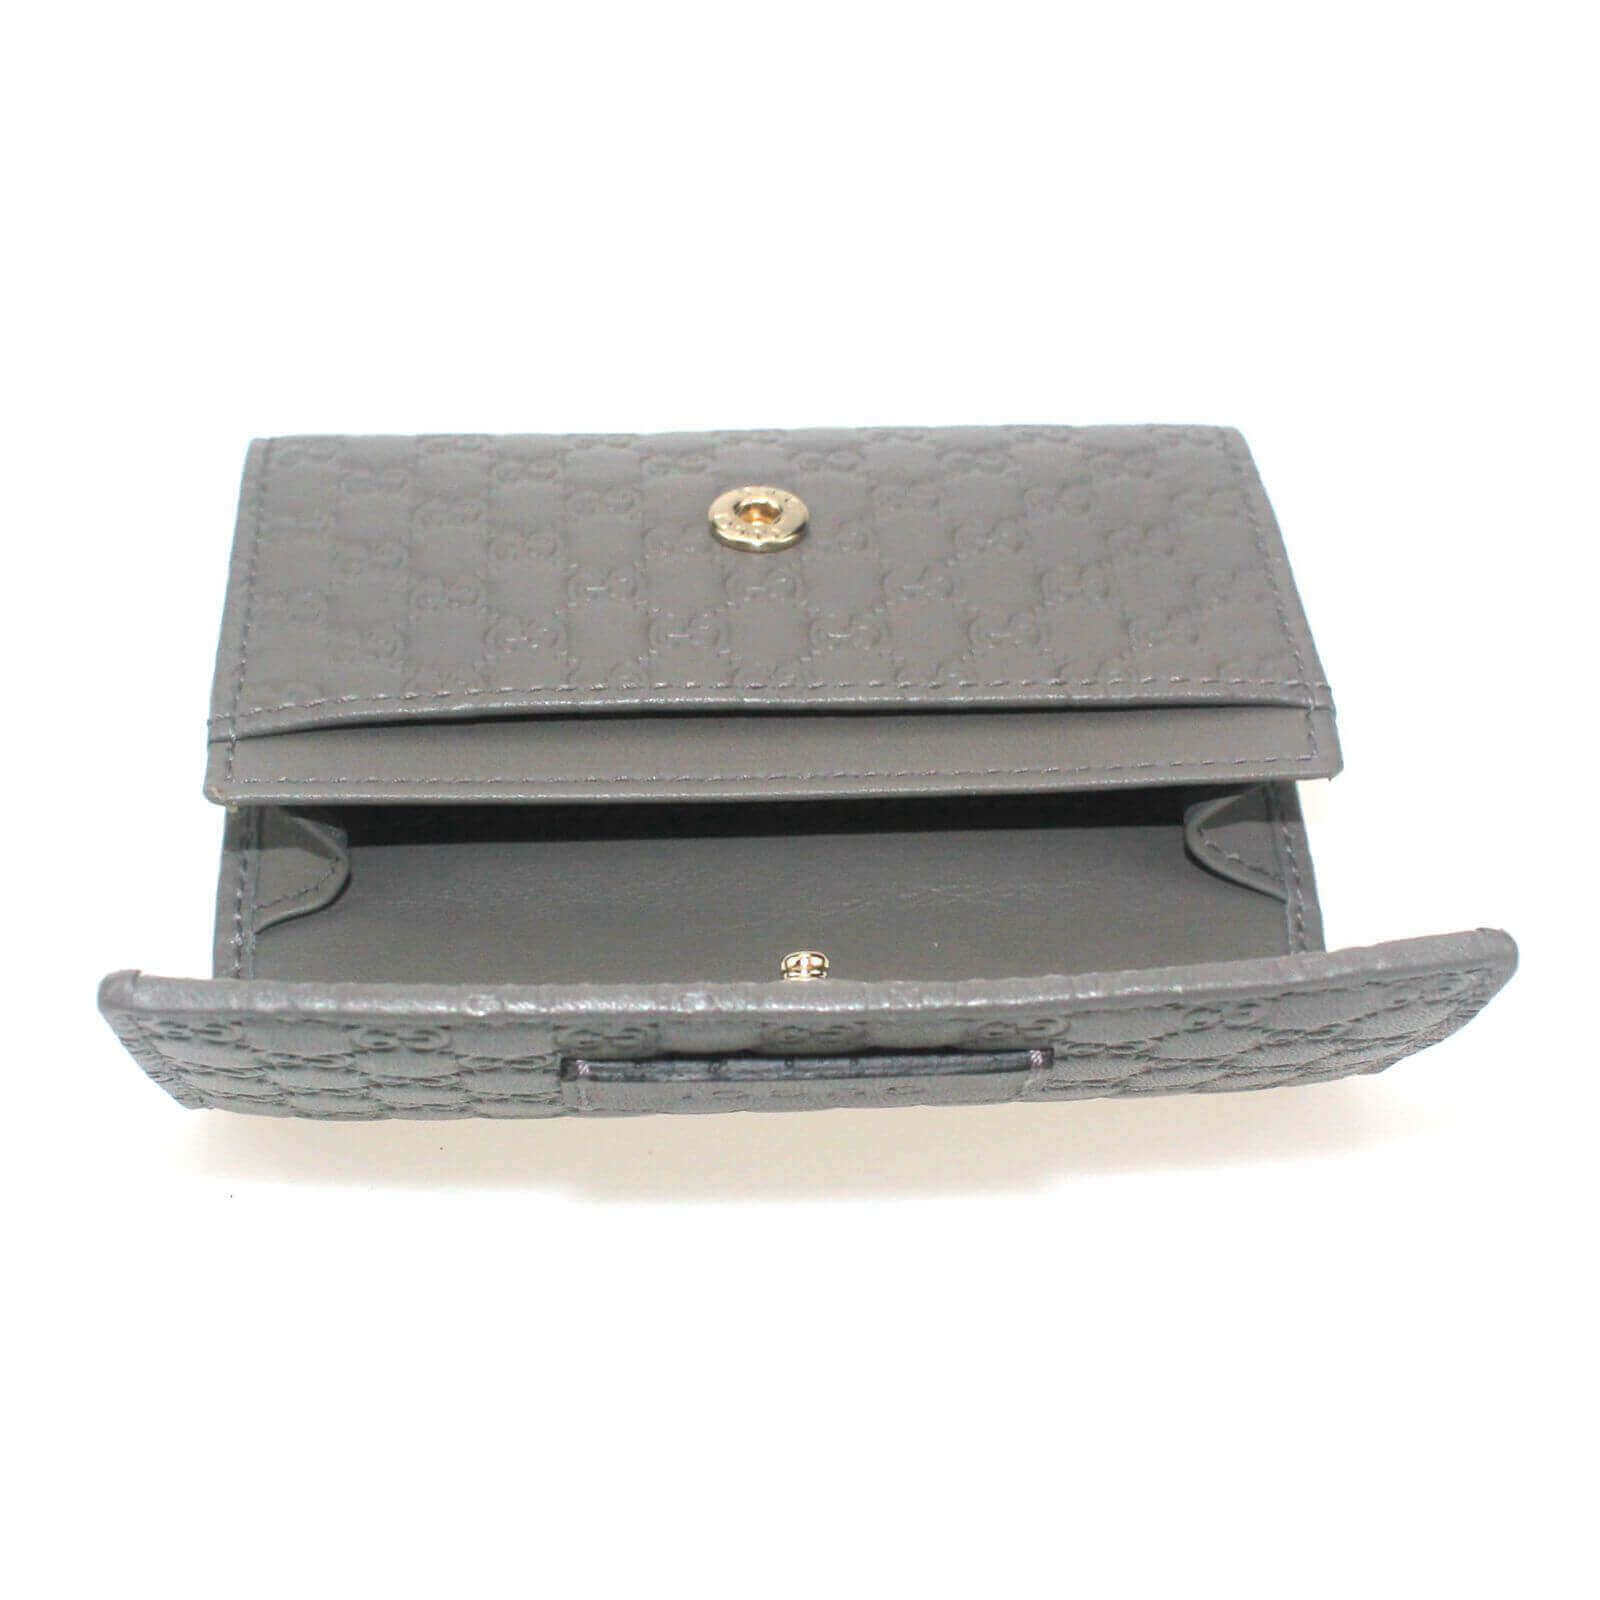 Gucci Blue Microguccissima Leather Credit Card Case Holder Wallet